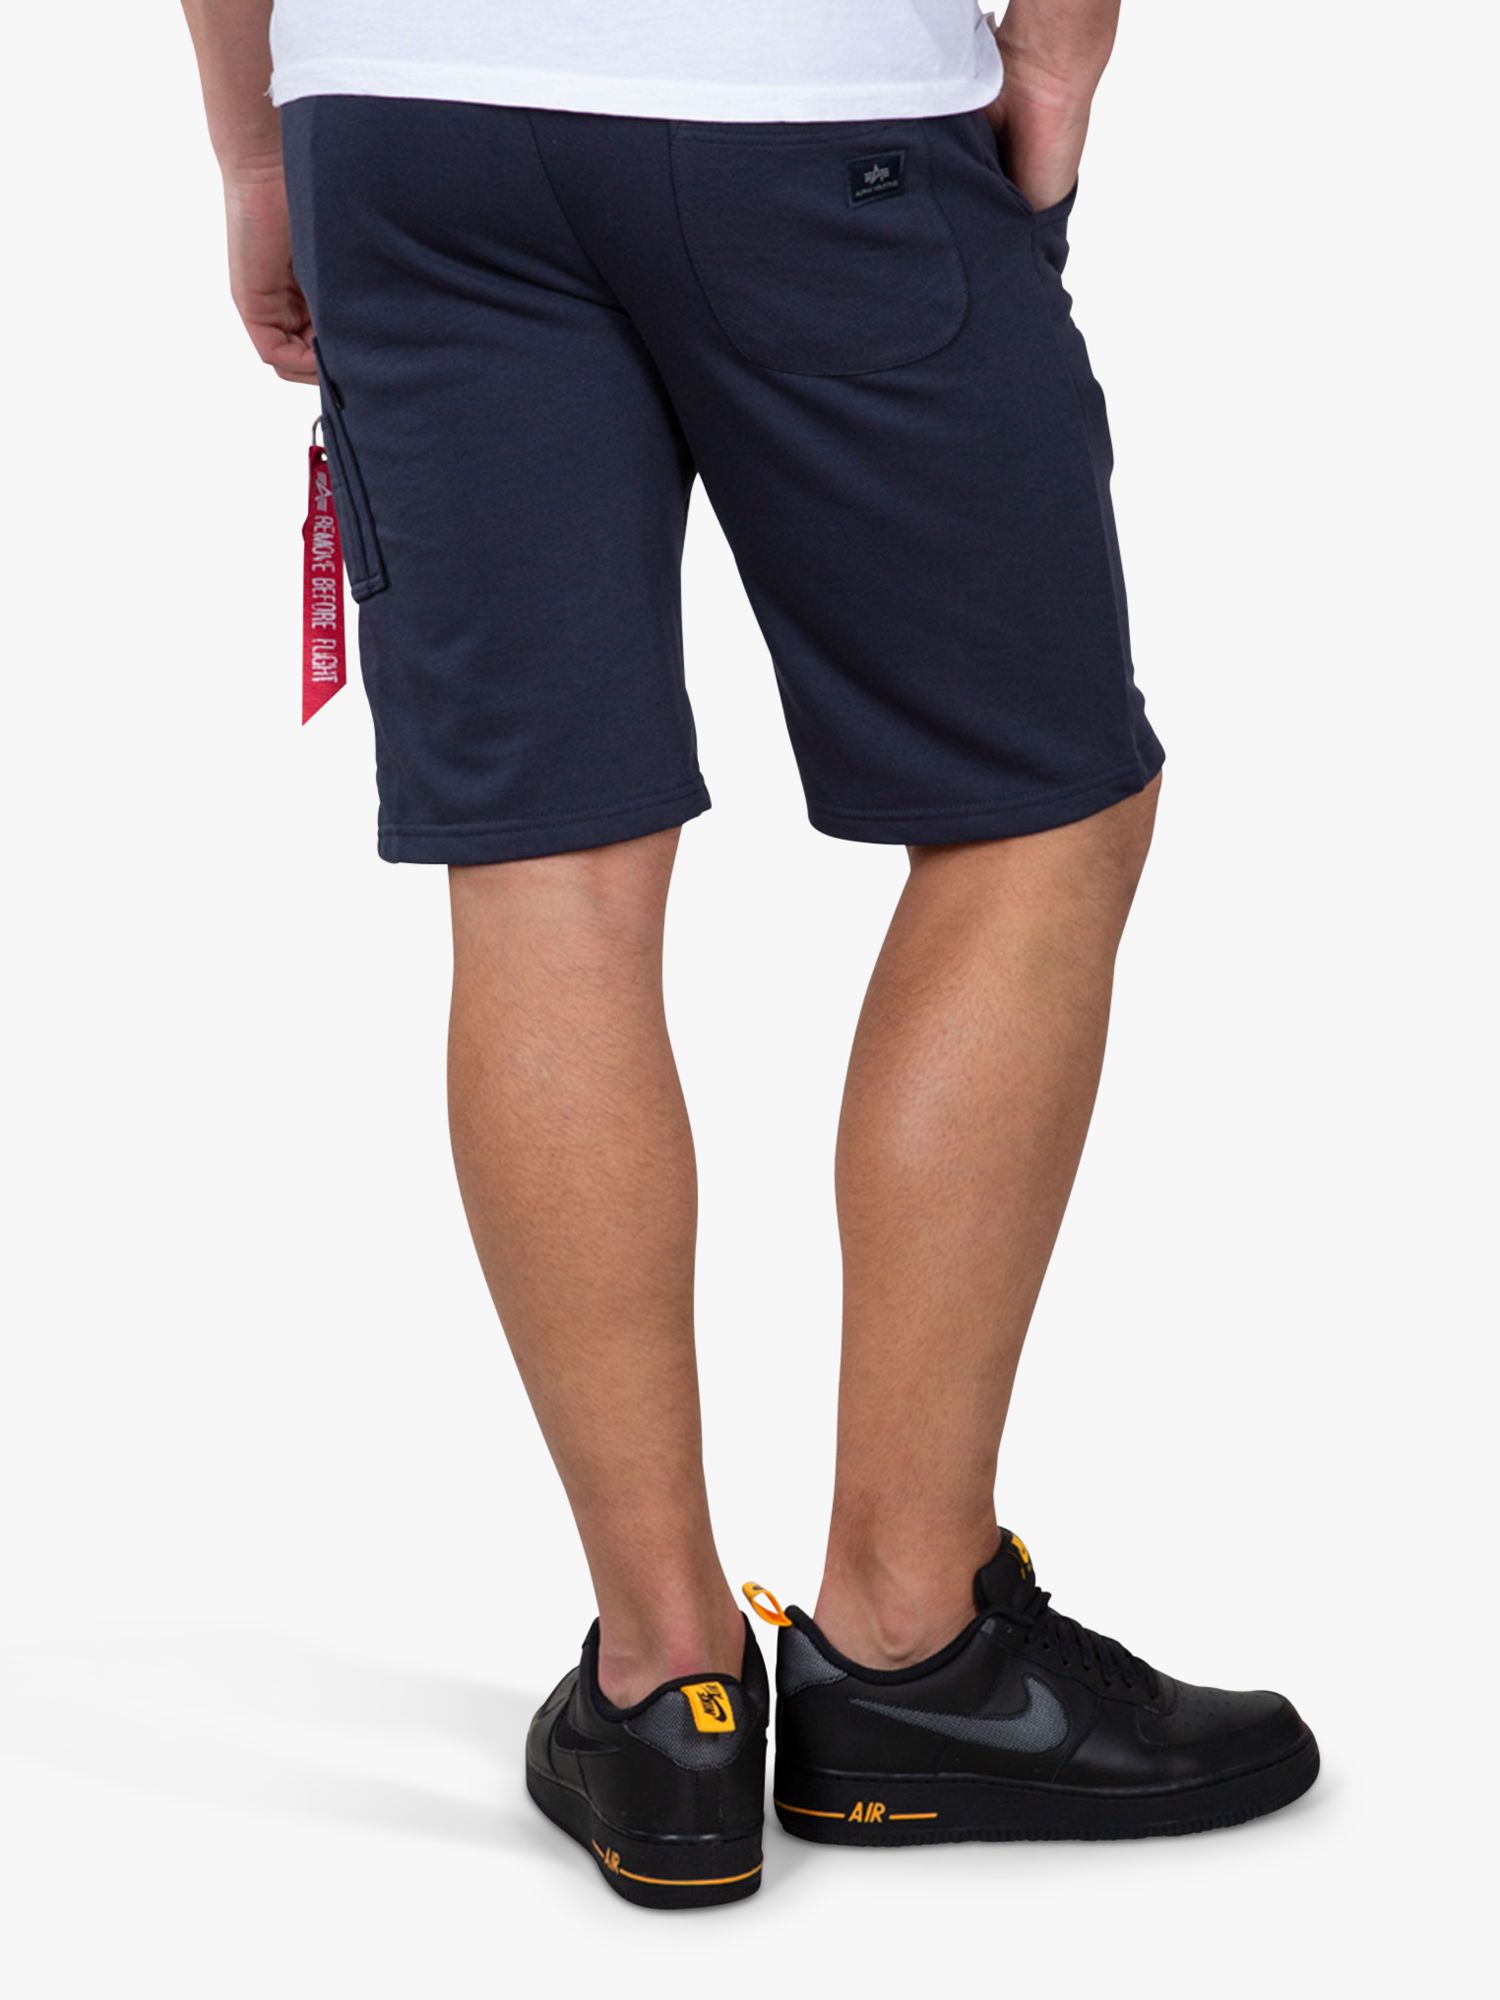 Alpha Industries X-Fit Cargo Sweat 07 John Blue Shorts, & Rep Partners at Lewis